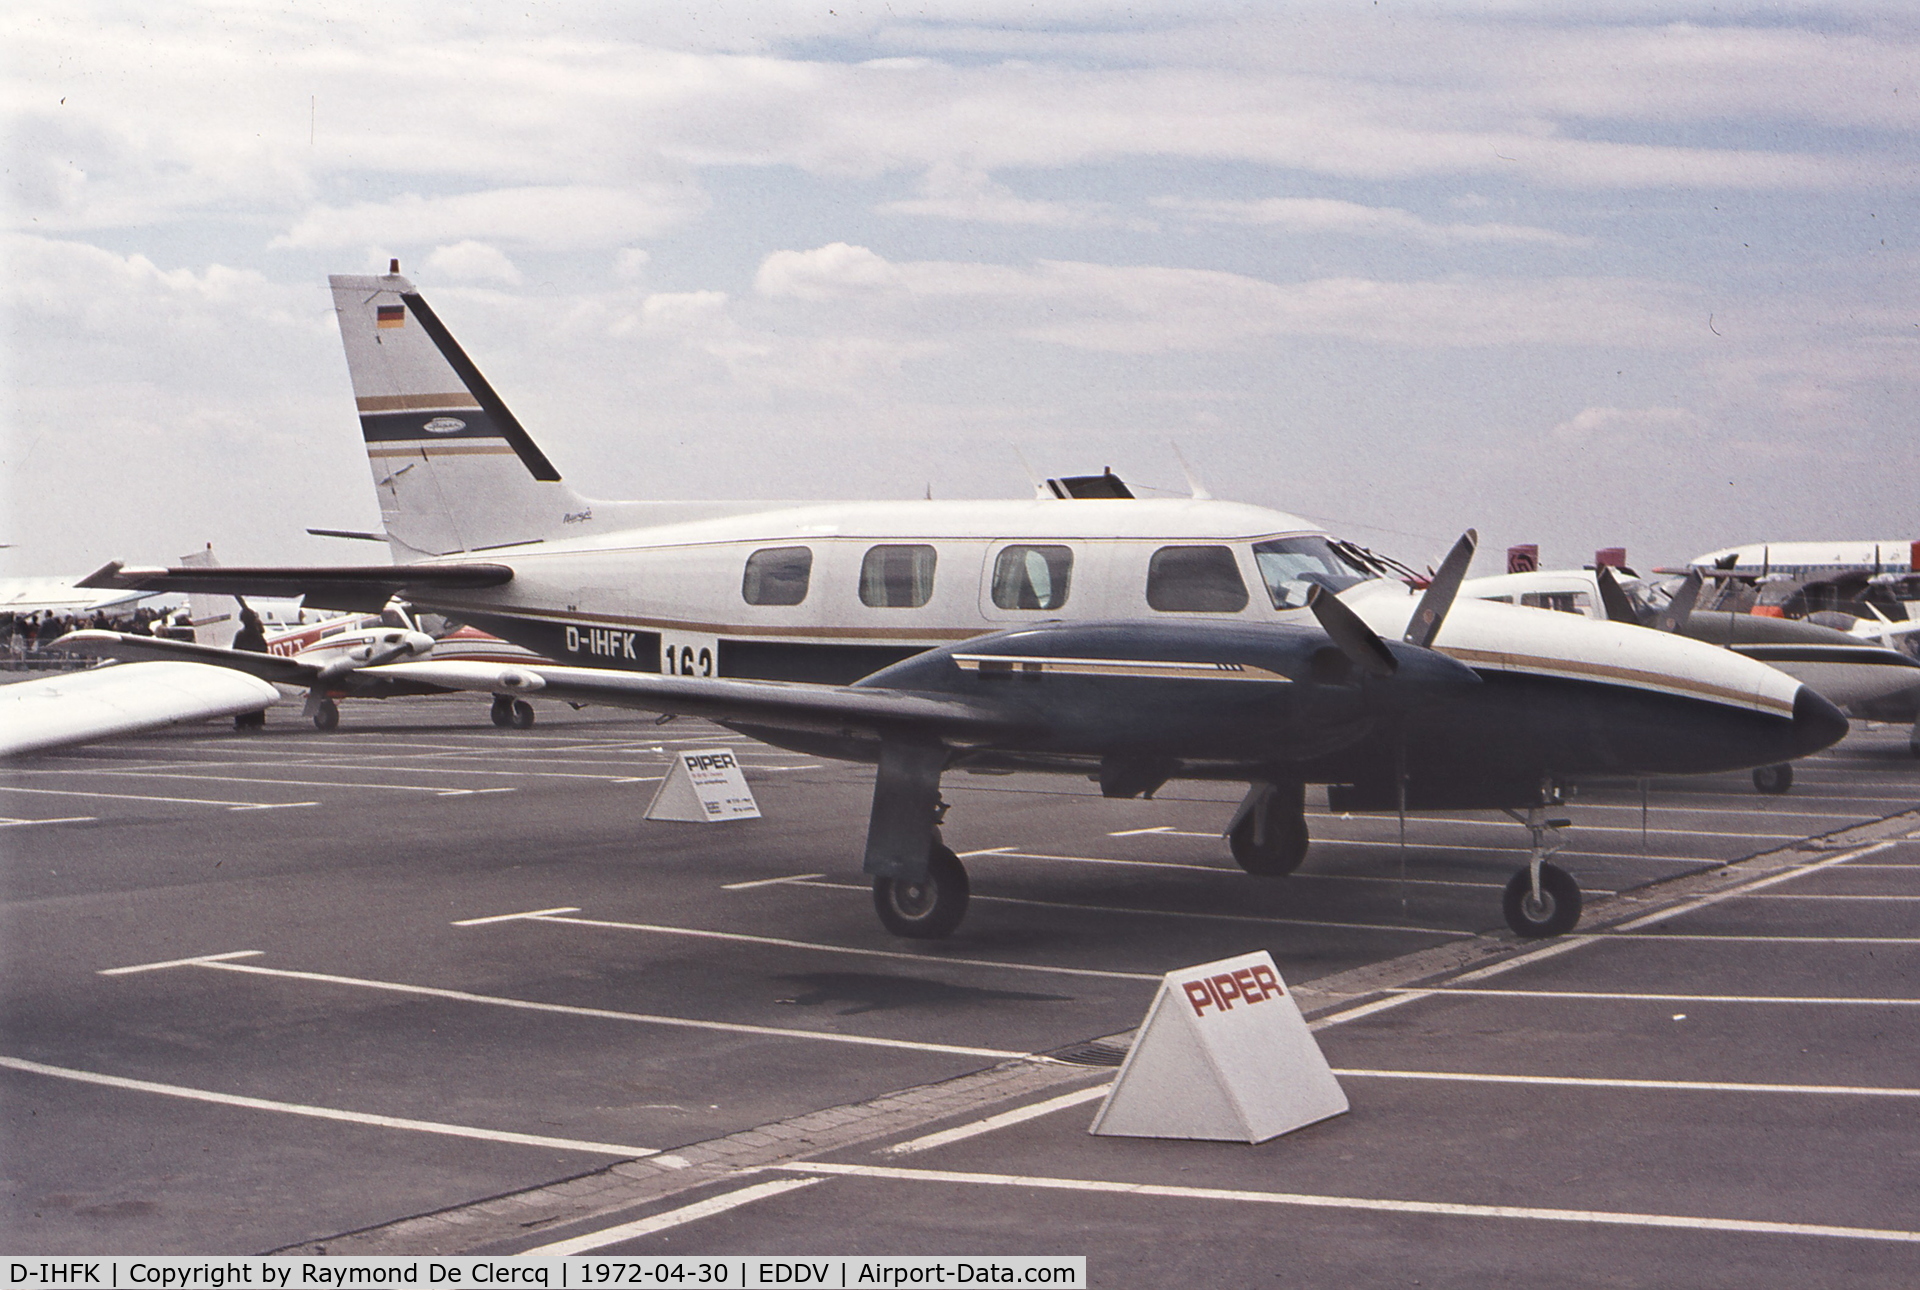 D-IHFK, 1970 Piper PA-31P Navajo C/N 31P-029, Hannover Messe 1972